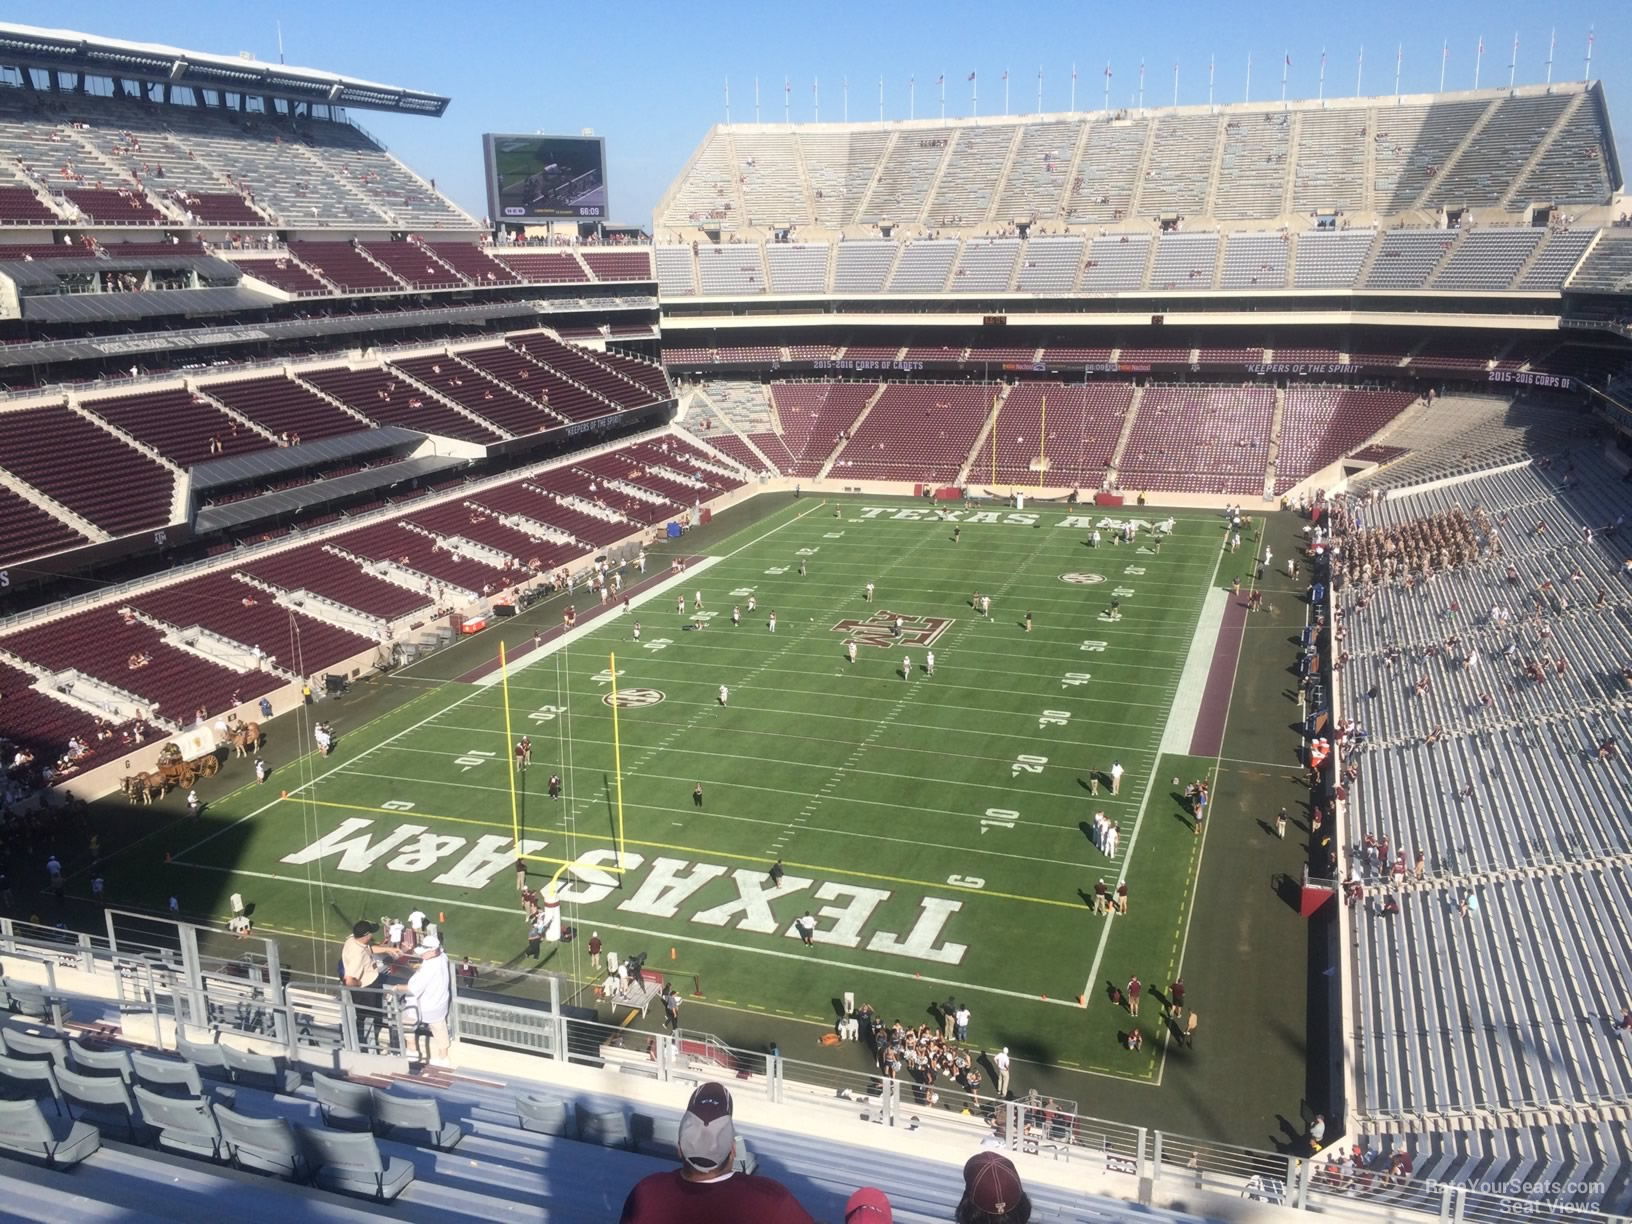 Kyle Field Seating Chart With Rows And Seat Numbers